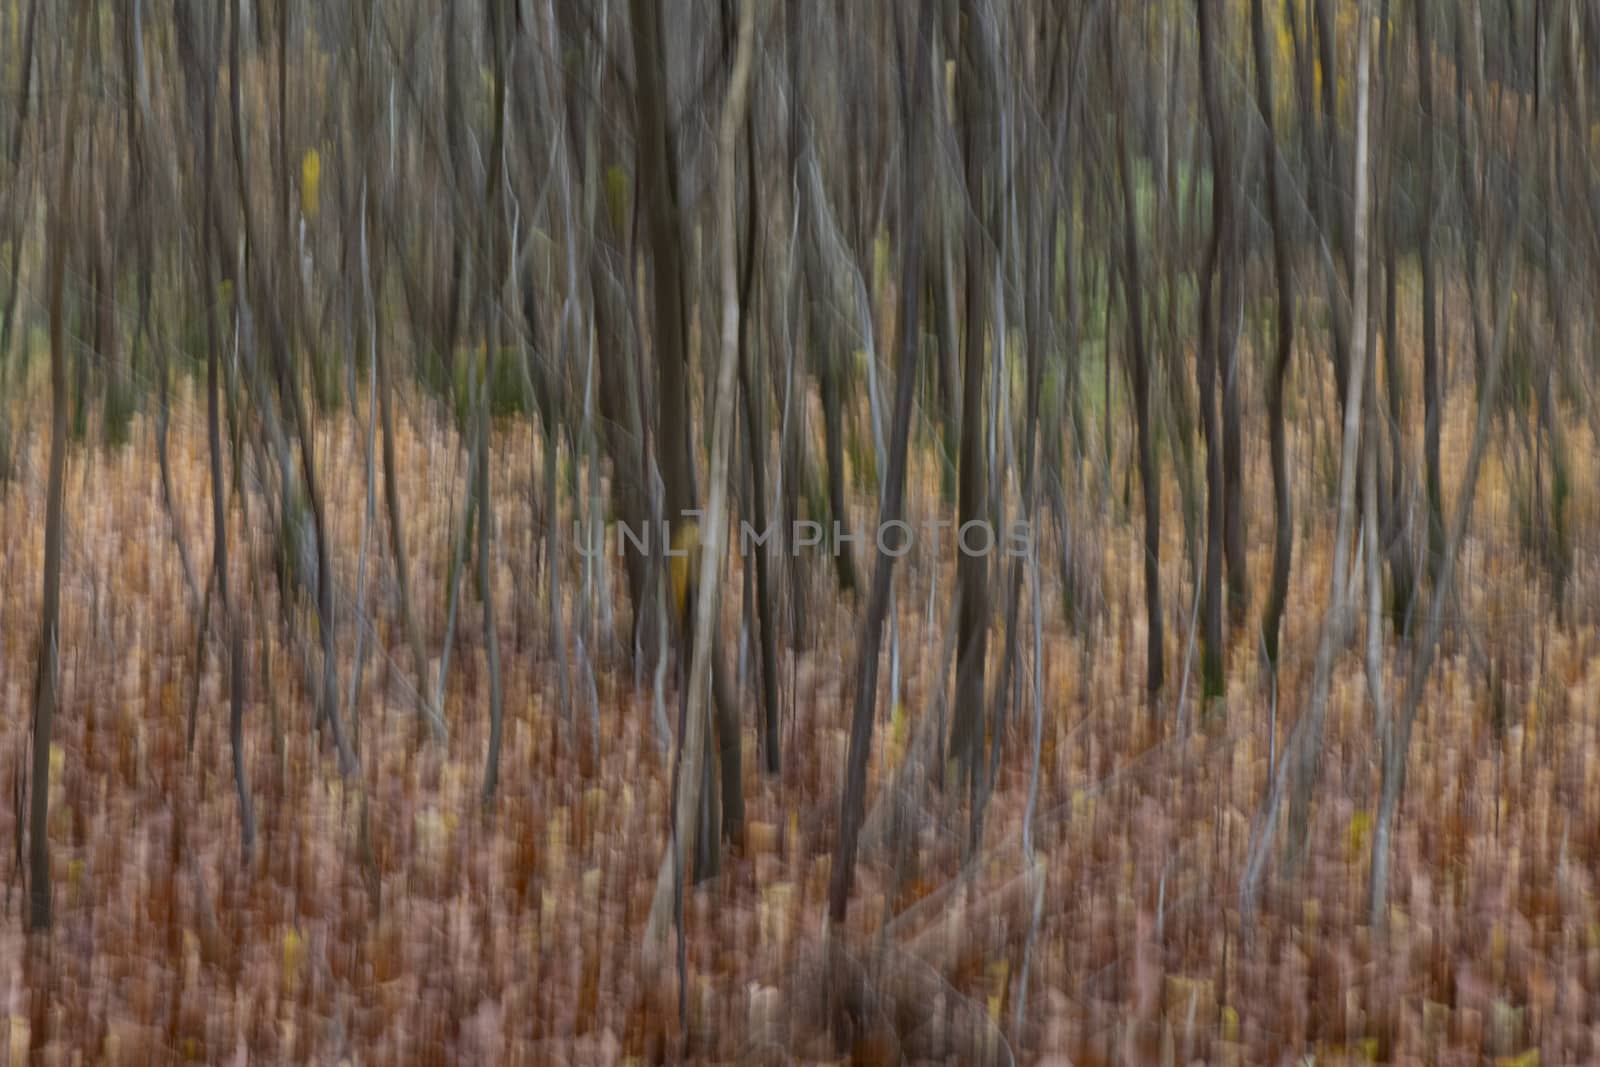 Abstract trees in a forest photographed with subtle movement so picturesque effect
